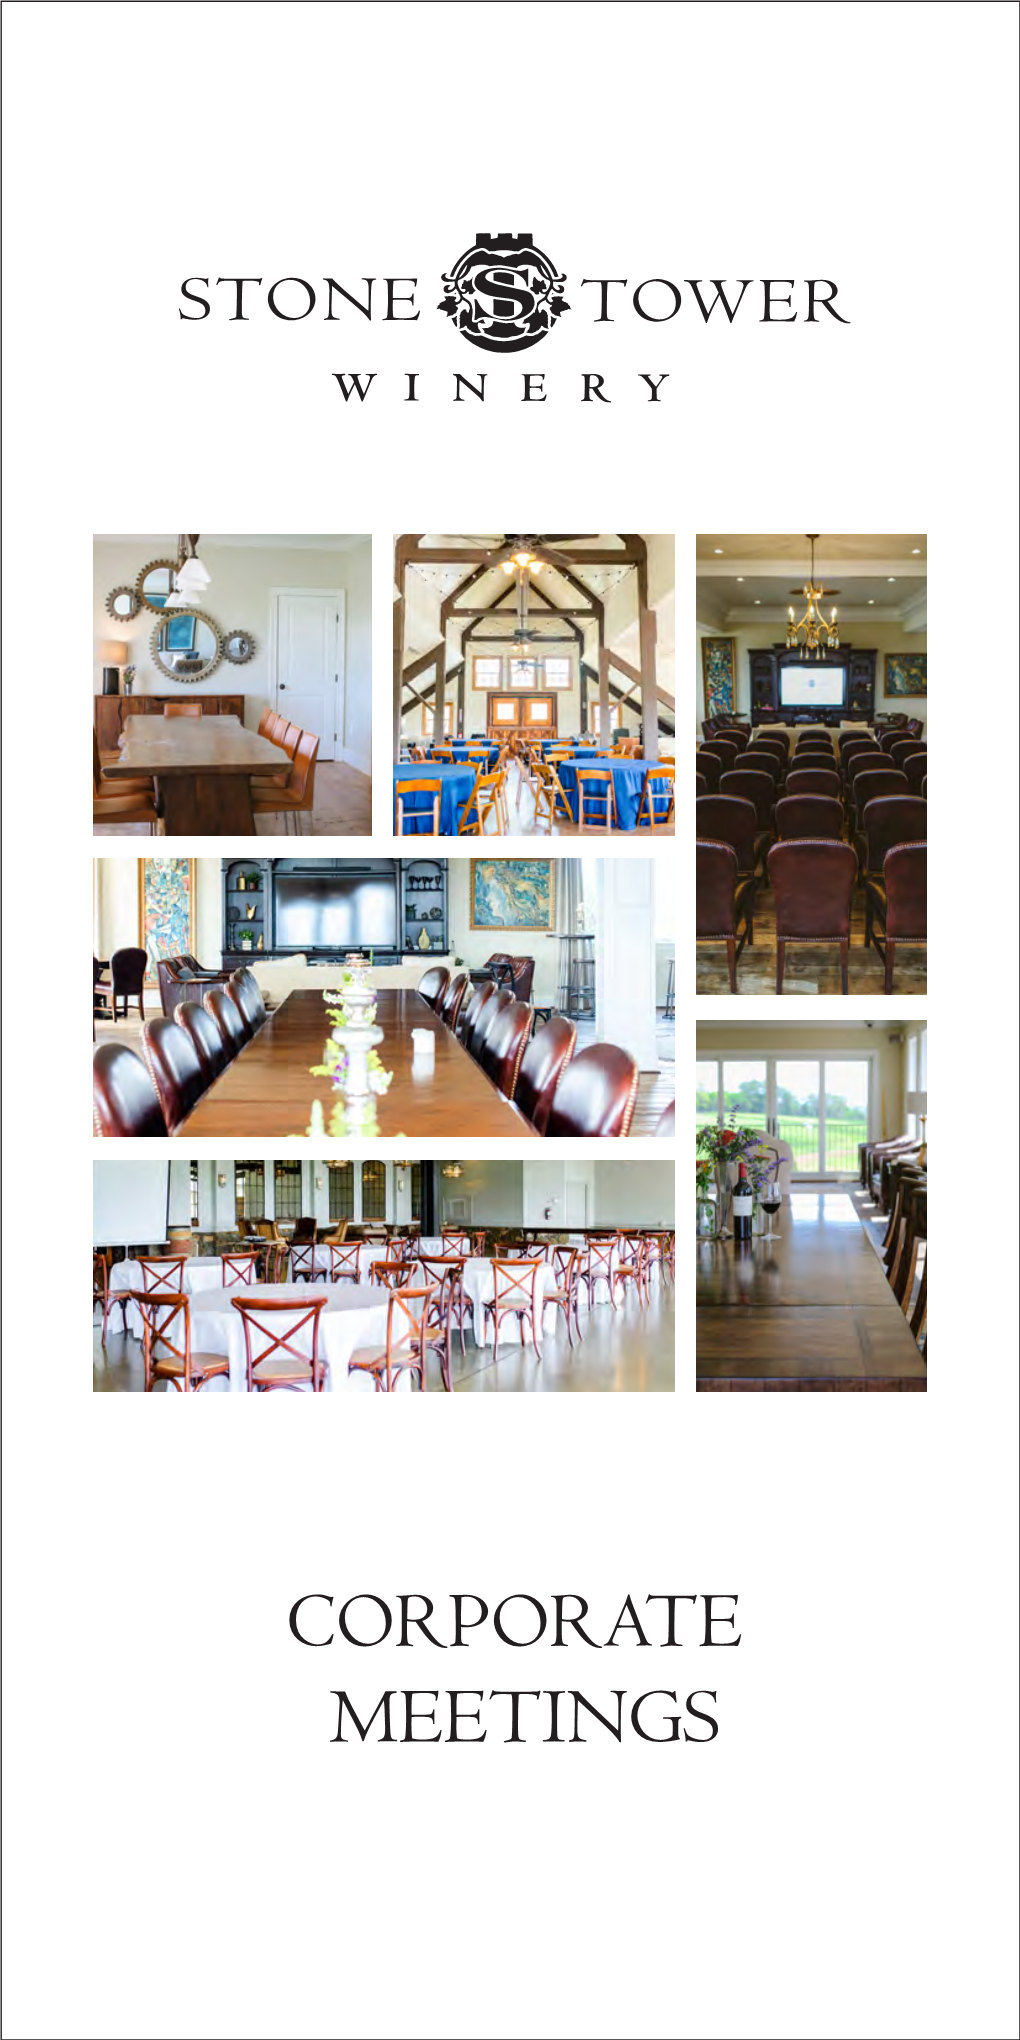 CORPORATE MEETINGS Our Meeting Packages Are Perfect for Corporate O Sites of All Sizes